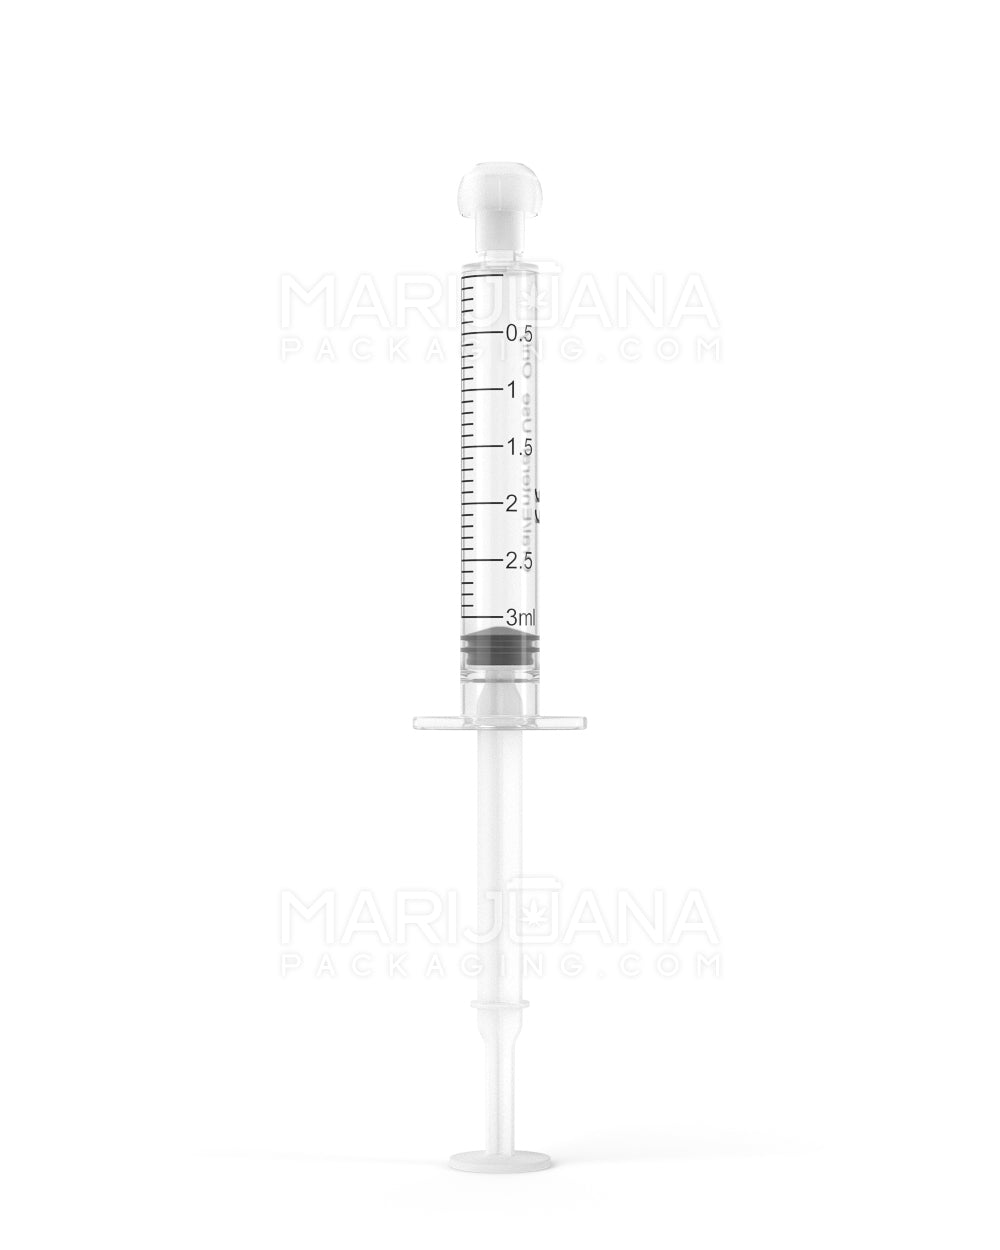 Plastic Oral Concentrate Syringes | 3mL - 0.5mL Increments | Sample - 1